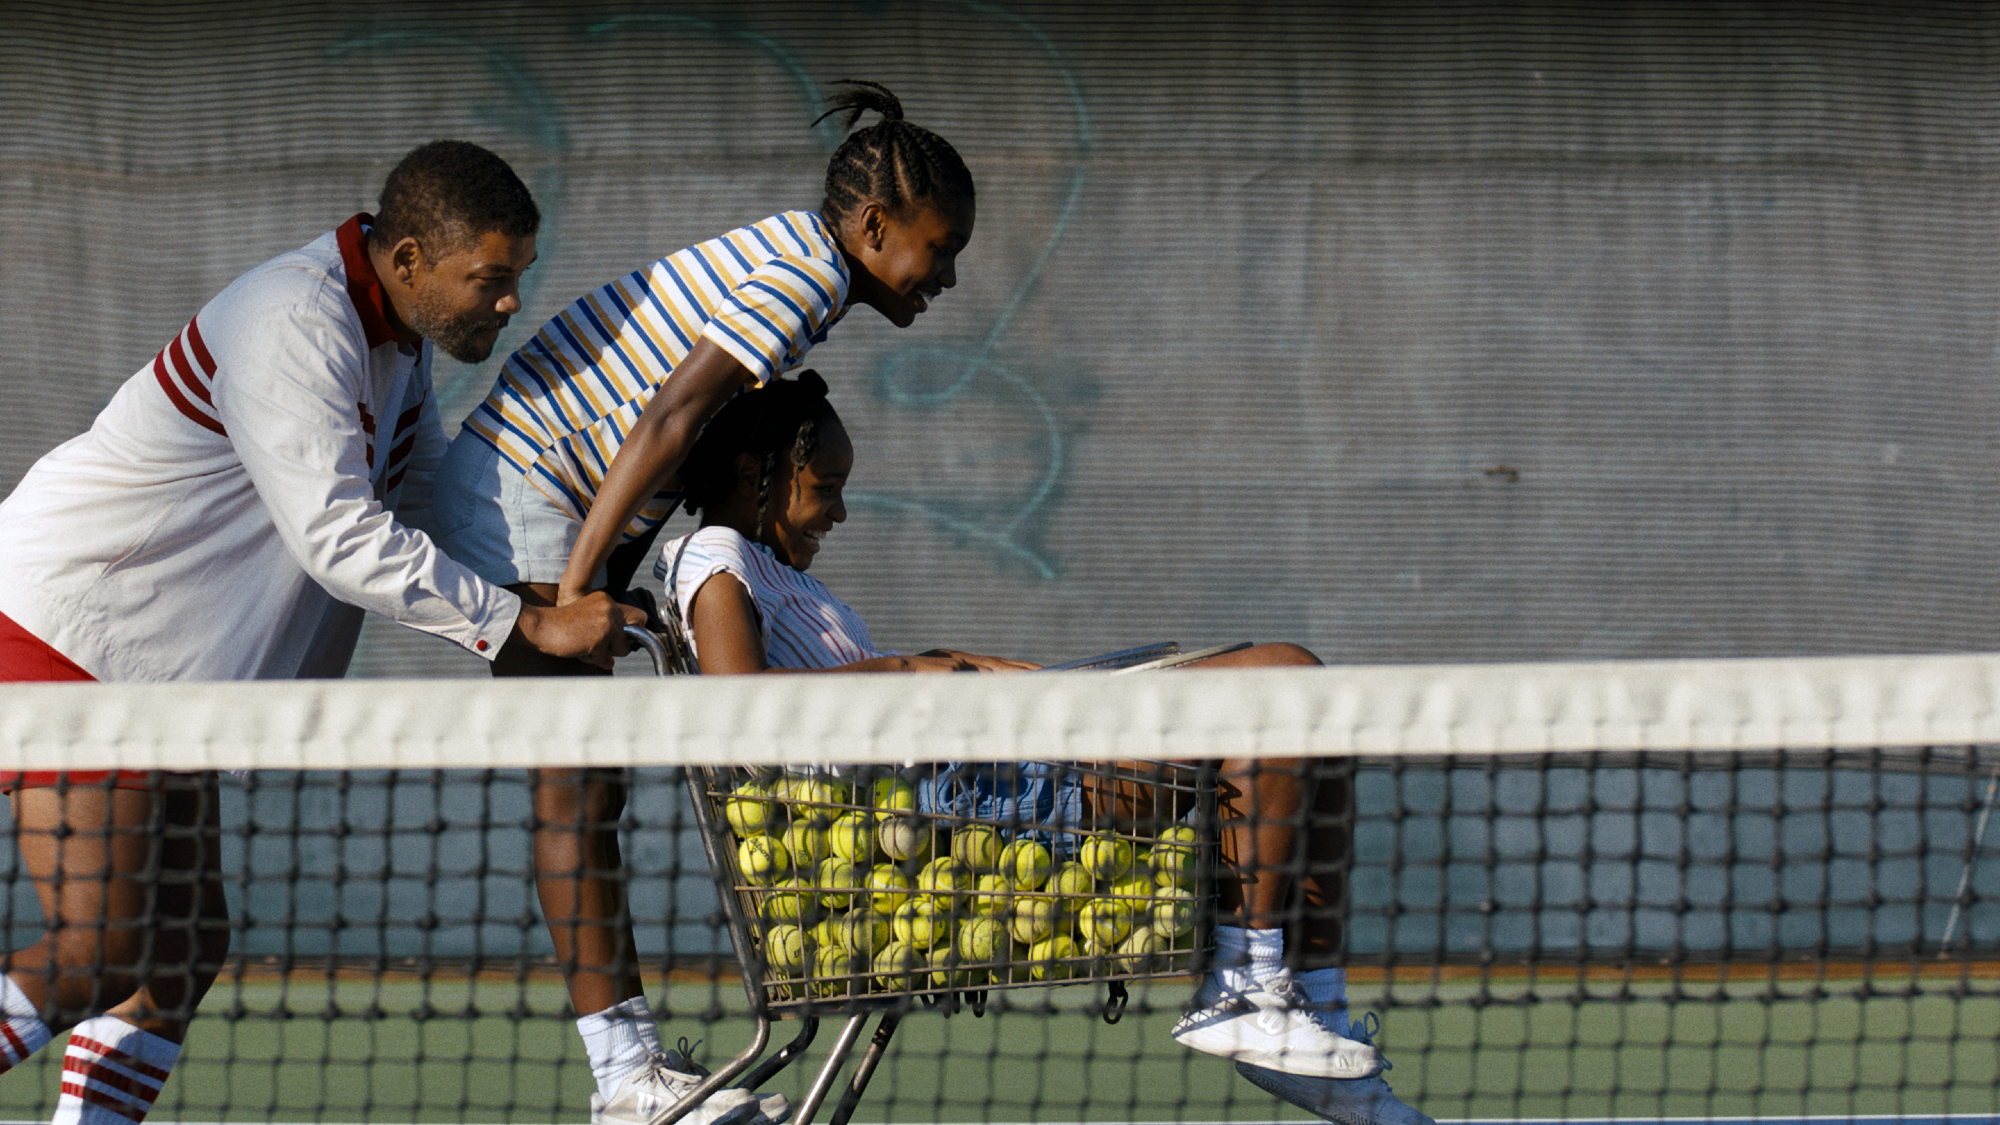 'King Richard' review starring Will Smith as Richard Williams, Demi Singleton as Serena Williams, and Saniyya Sidney as Venus Williams with Richard pushing the girls in a tennis ball-filled cart behind the tennis net